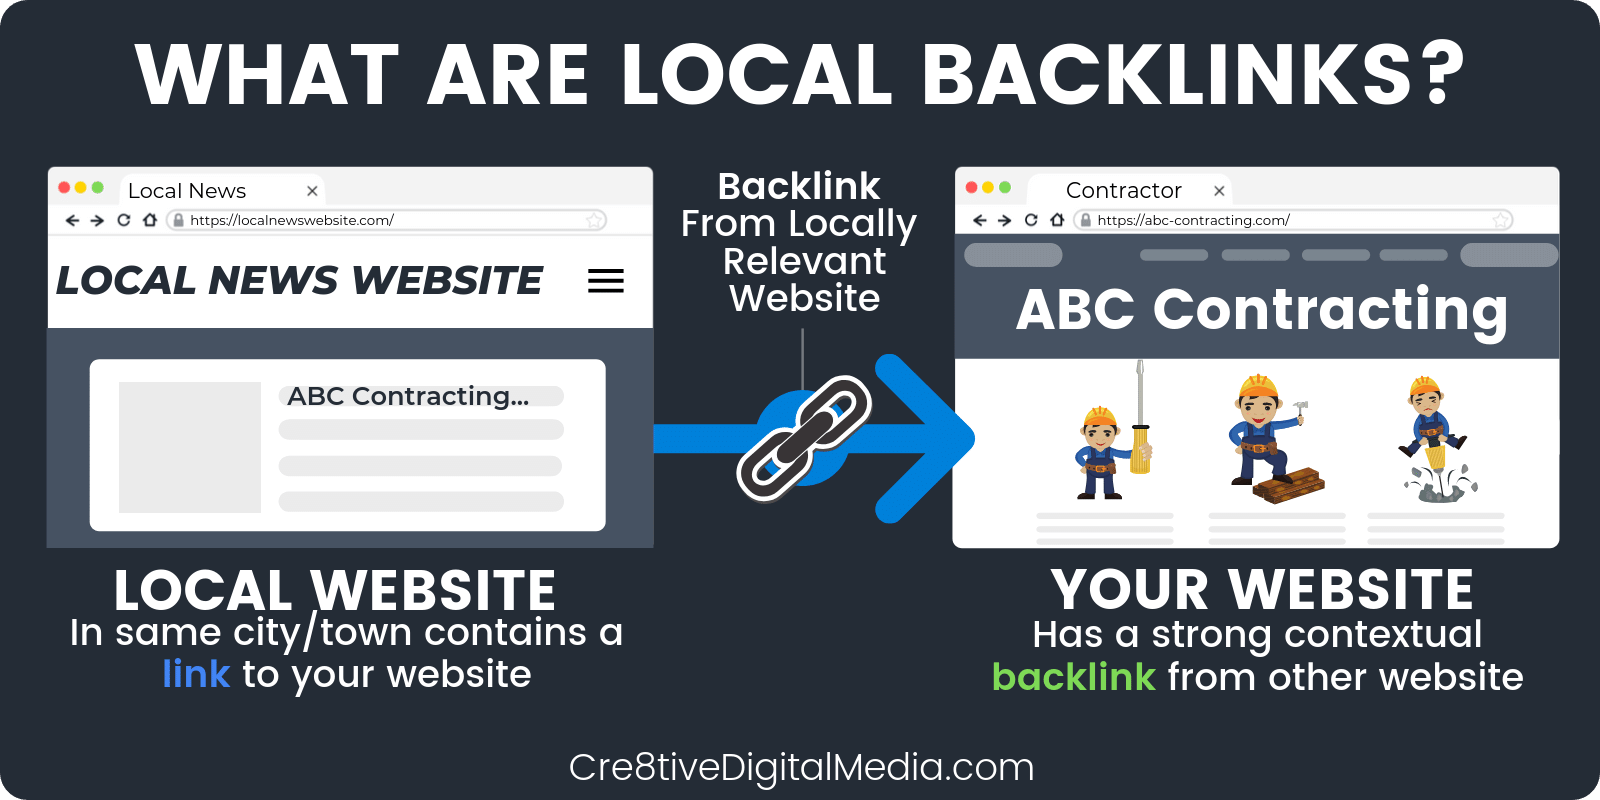 What Are Local Backlinks?